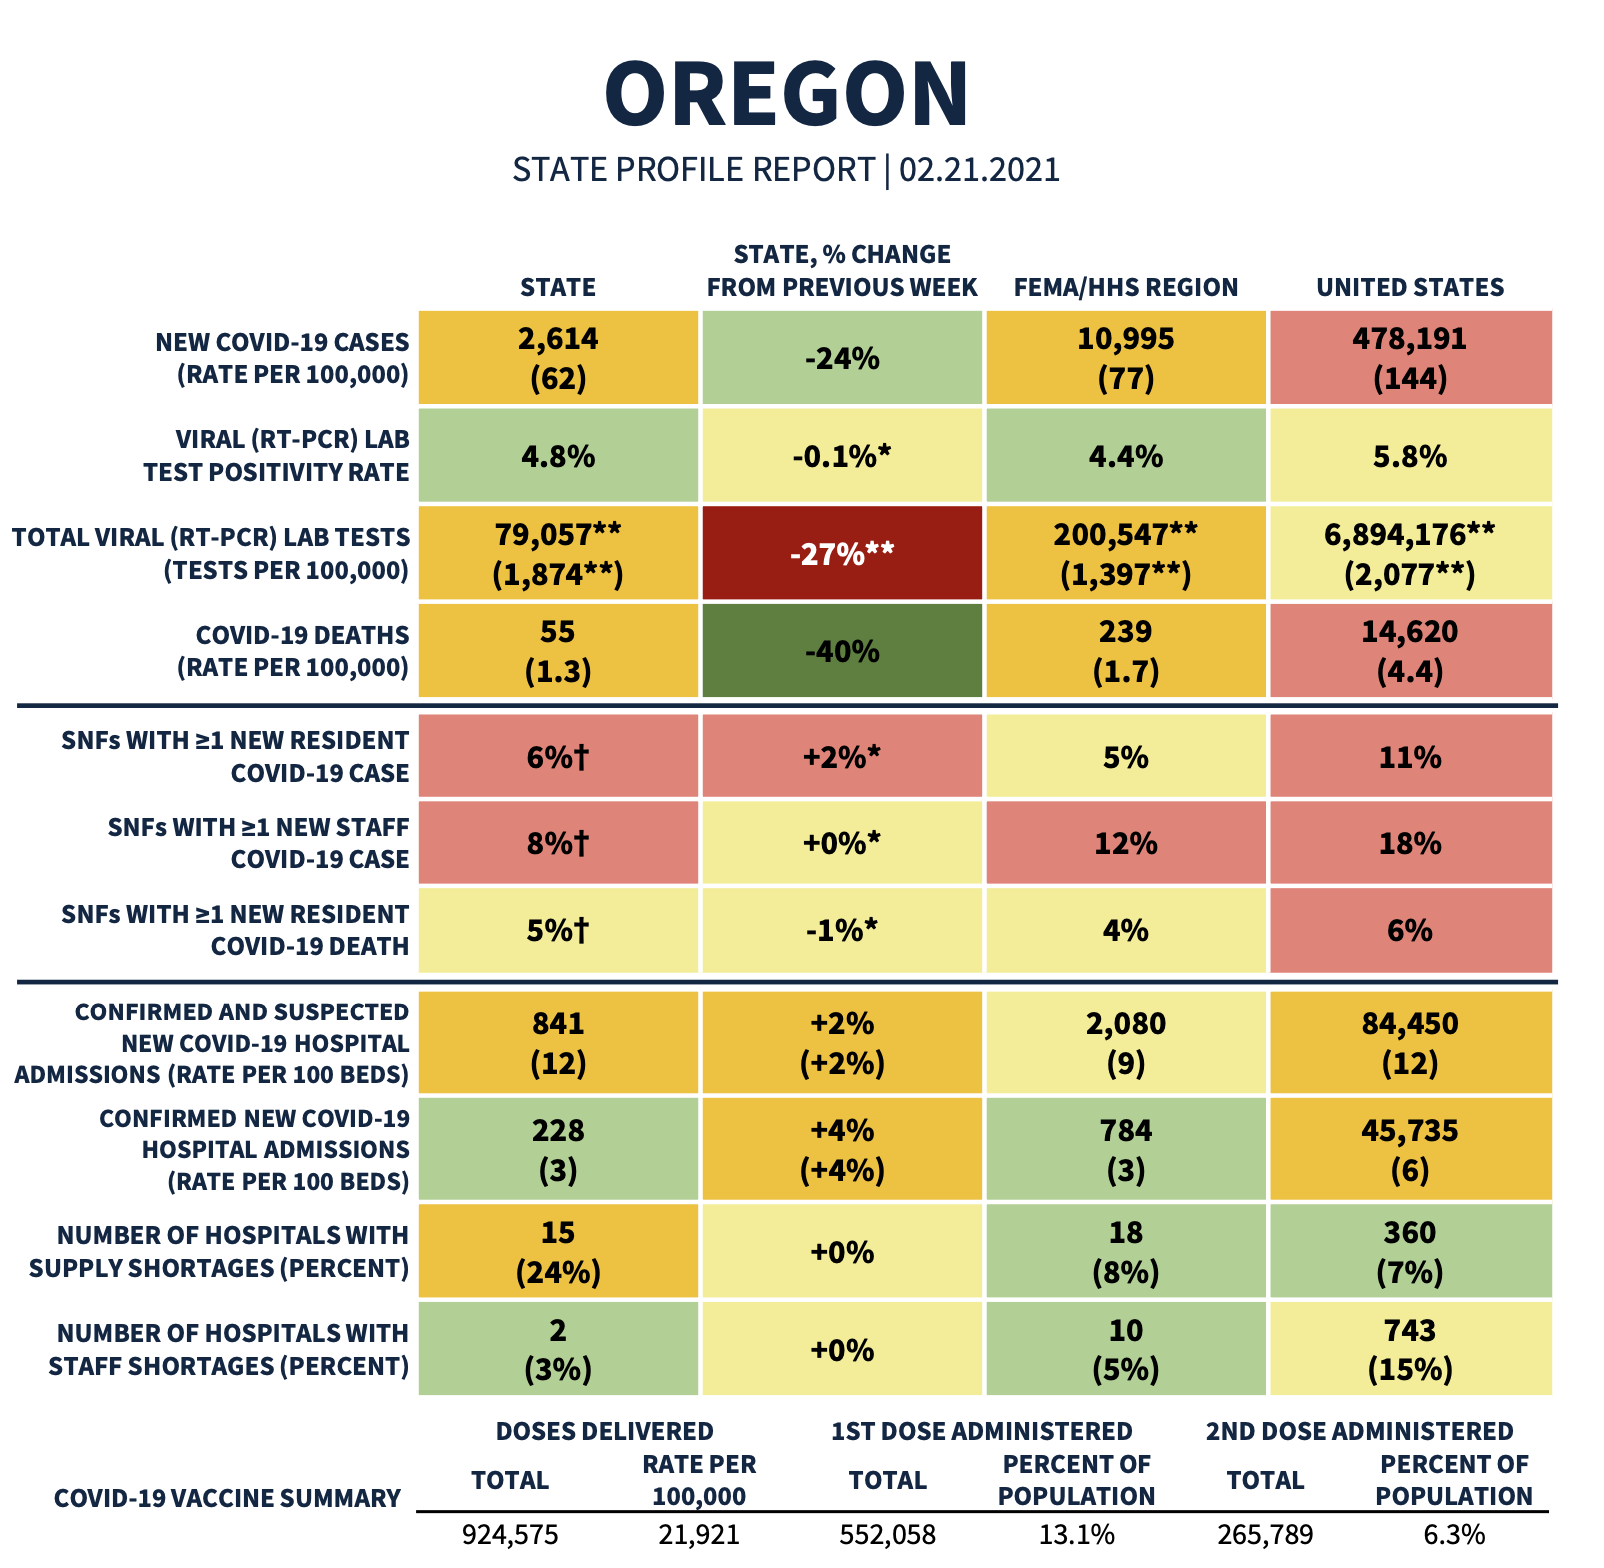 Chart from the federal's State Profile Report for Oregon showing many key COVID-19 metrics, including new cases, test positivity rate, lab tests, deaths, hospital admissions, and hospital shortages for the state, the FEMA region, and the US.